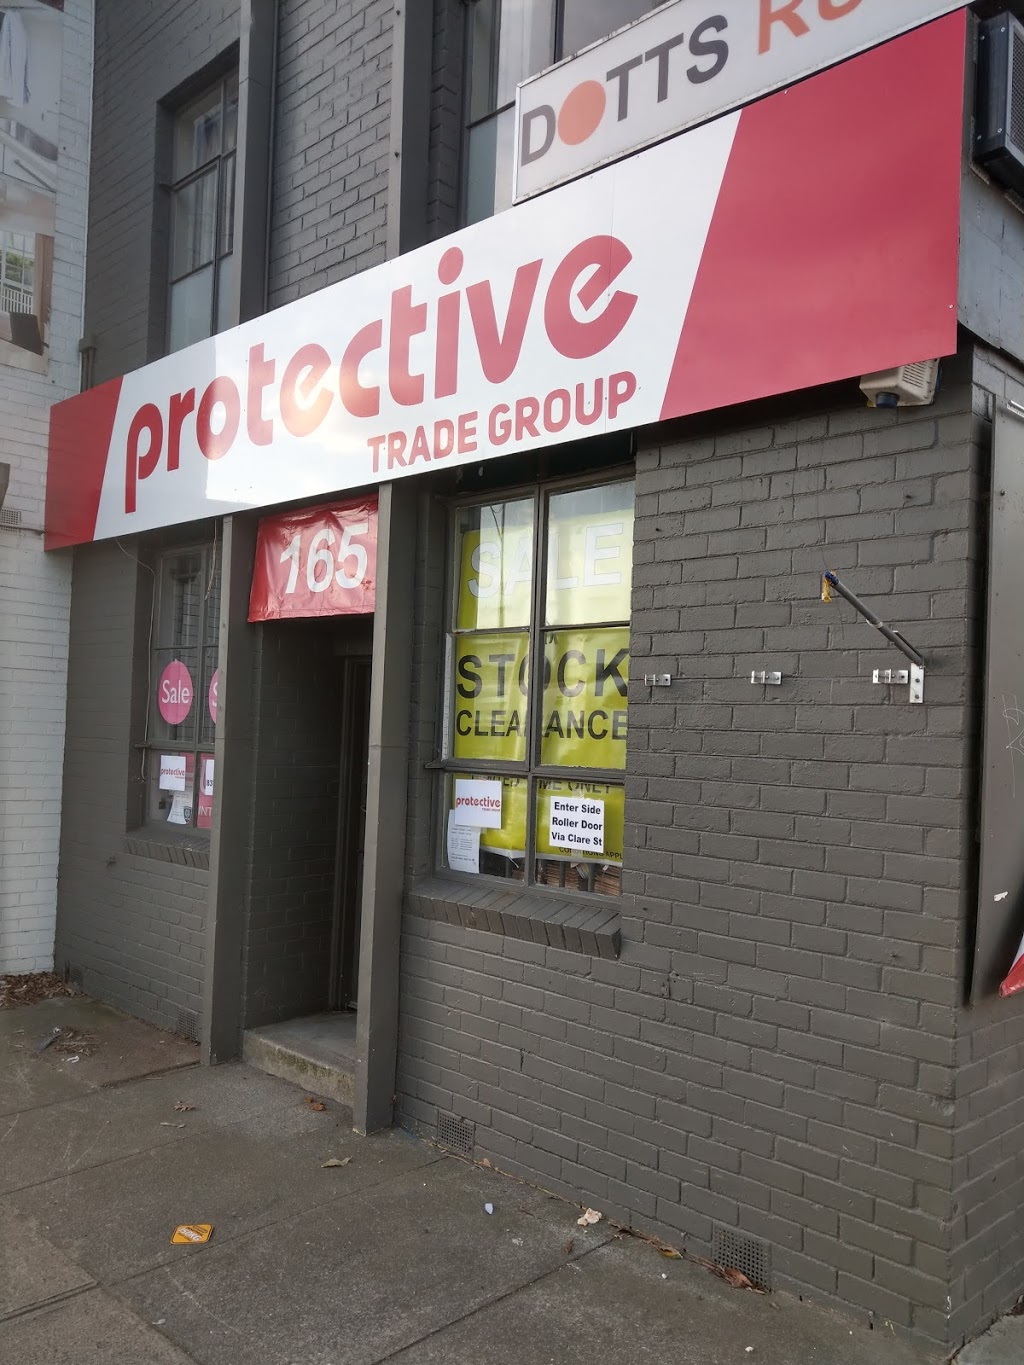 Protective Trade Group | clothing store | 165 Whitehorse Rd, Blackburn VIC 3130, Australia | 0383703235 OR +61 3 8370 3235